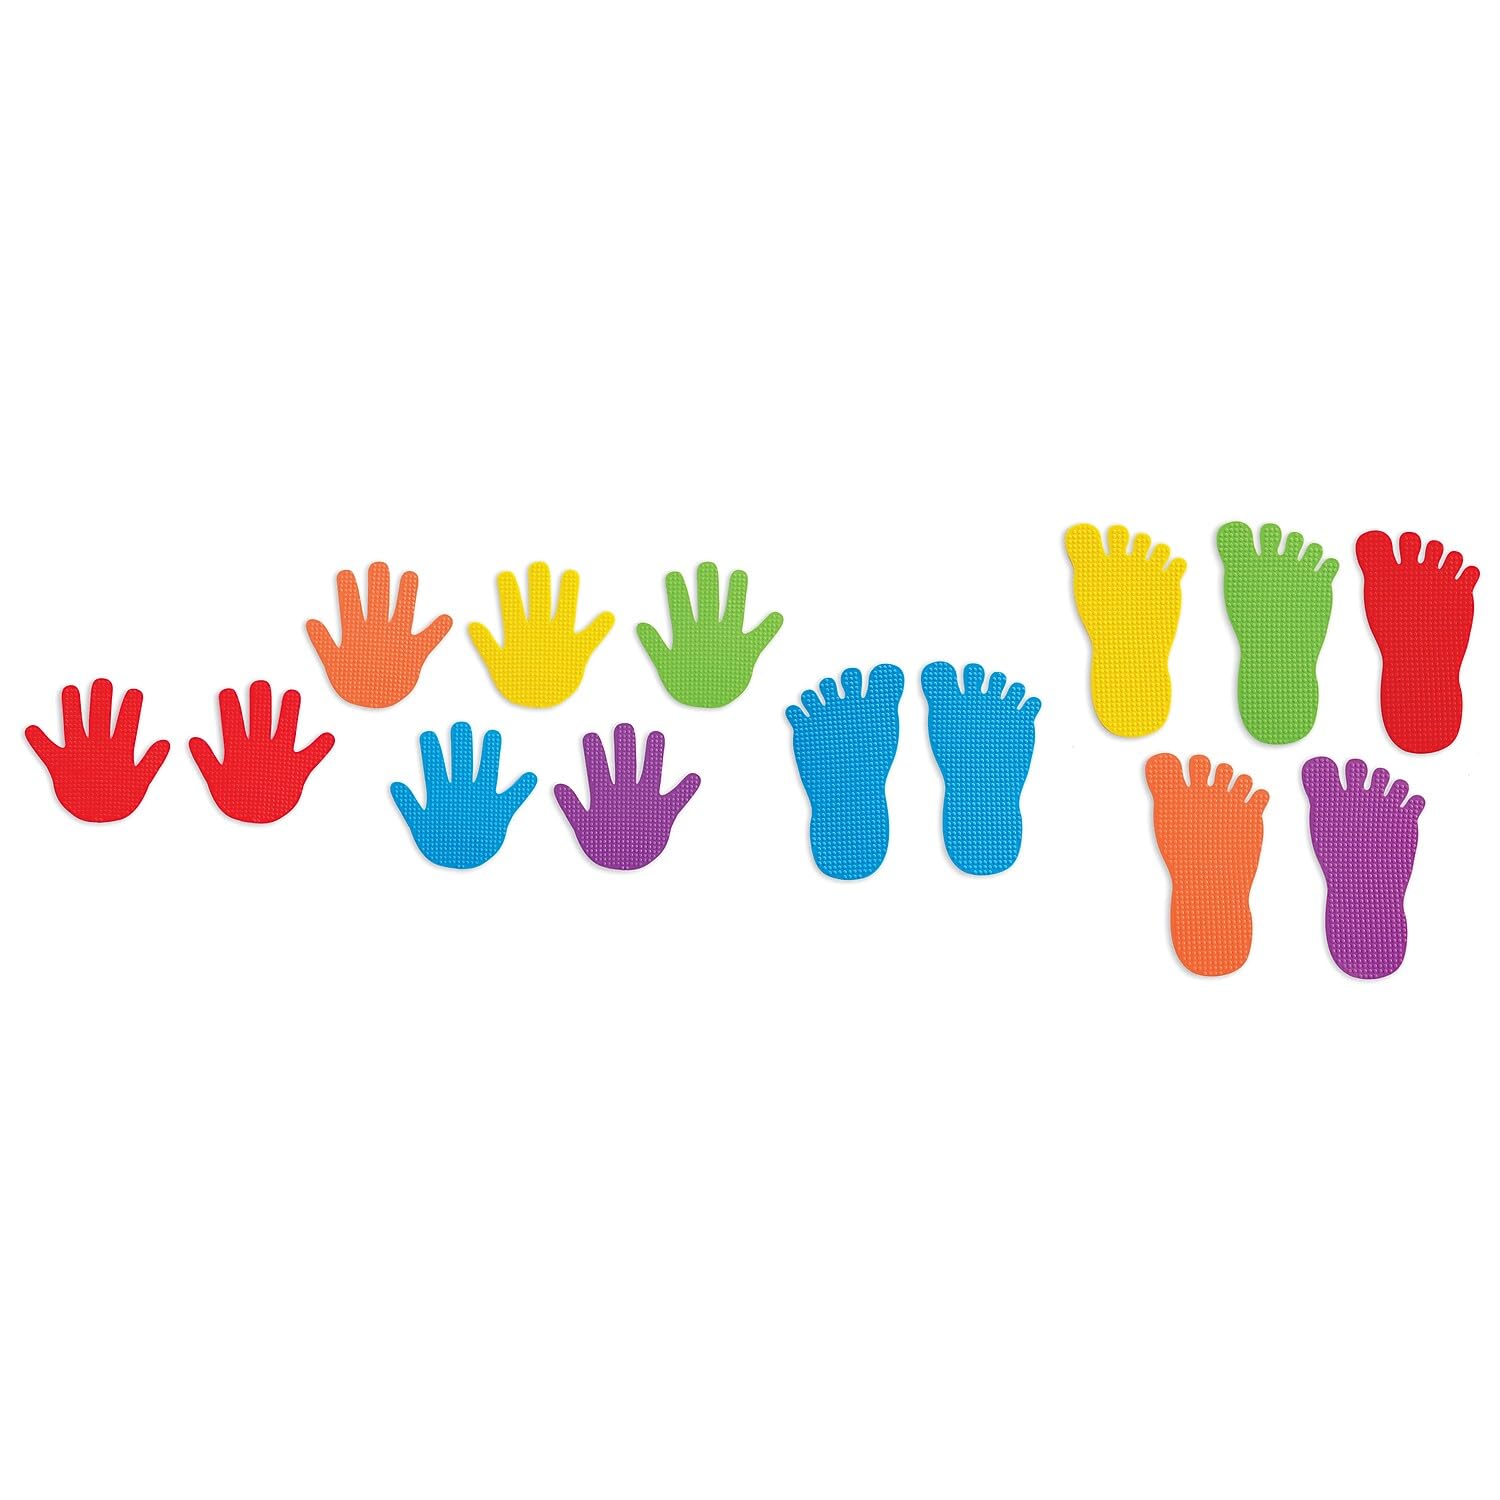 edxeducation-63525 Hand and Foot Mark Set - Includes 2 Large Die for Gameplay - Create Obstacle Courses - Tool for Gross Motor Skills, Occupational Therapy